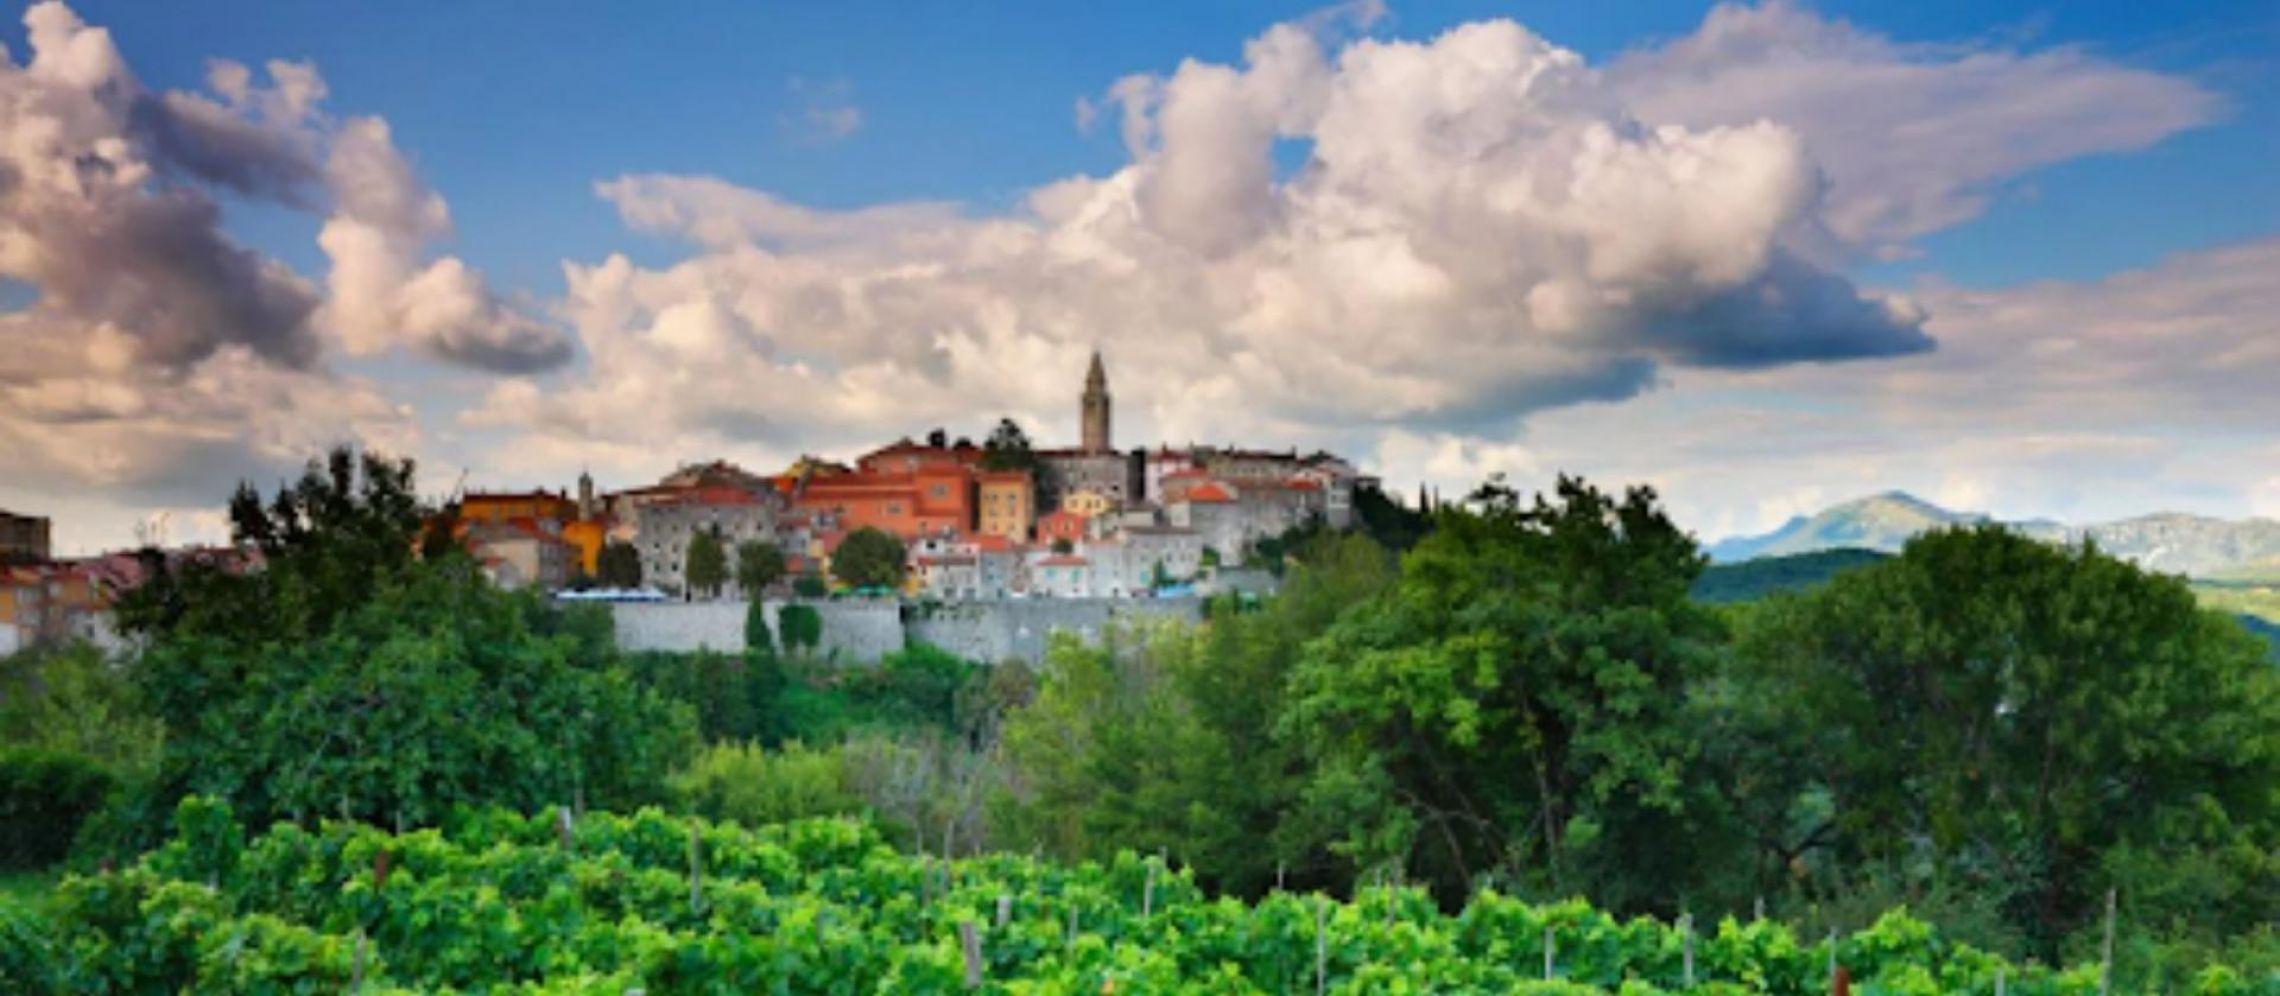 Photo for: The Boom of Croatian Wines